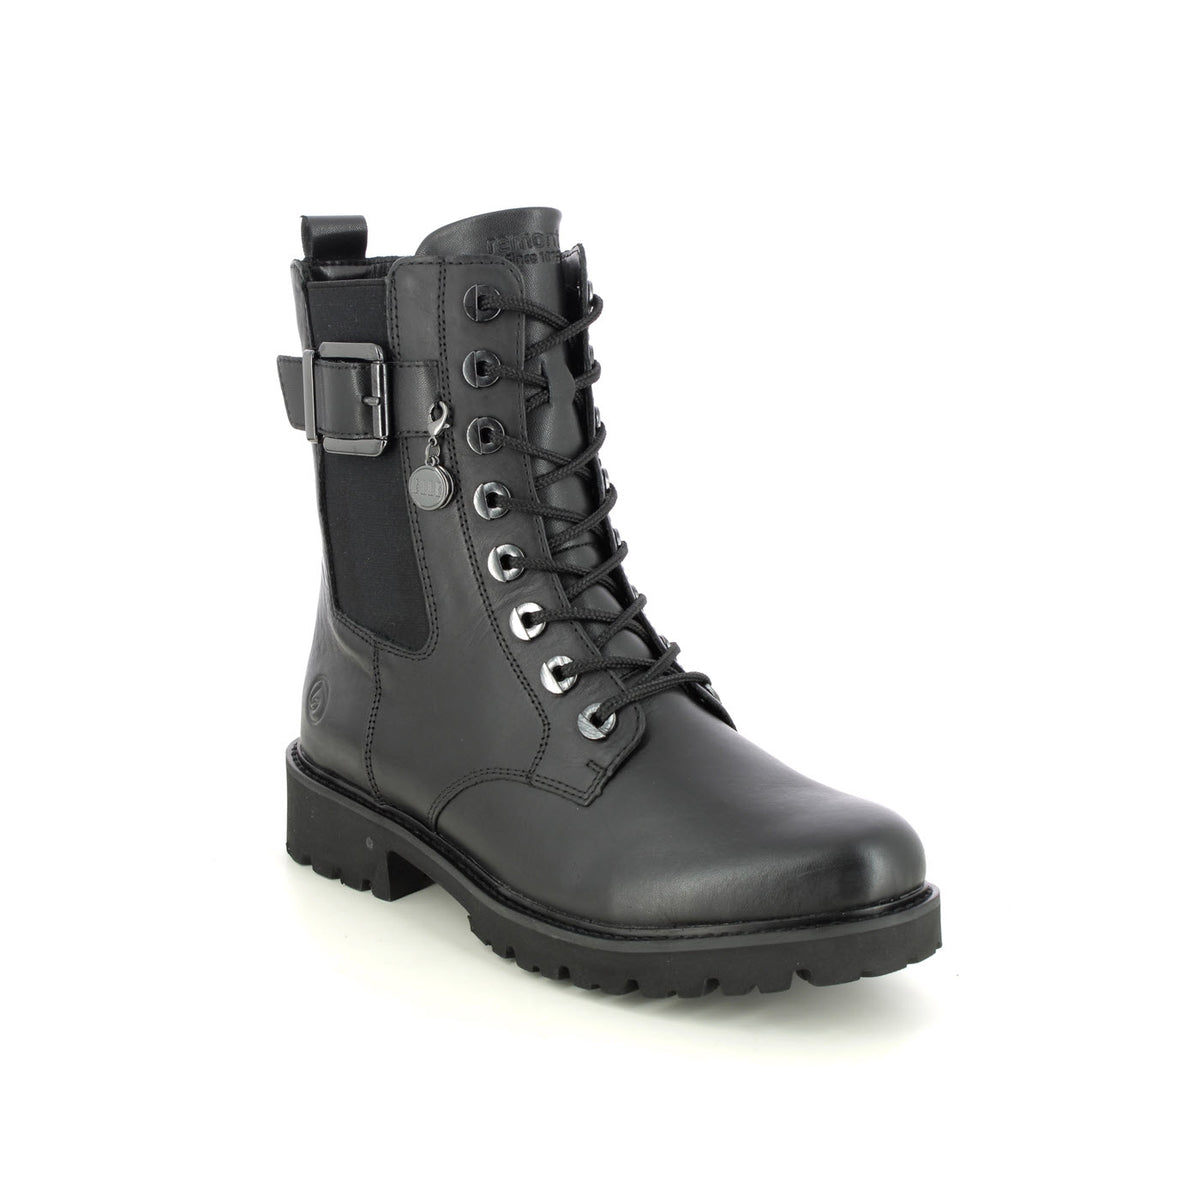 Remonte black leather combat boot with adjustable laces and a buckle, featuring a round emblem on the side, photographed on a white background.